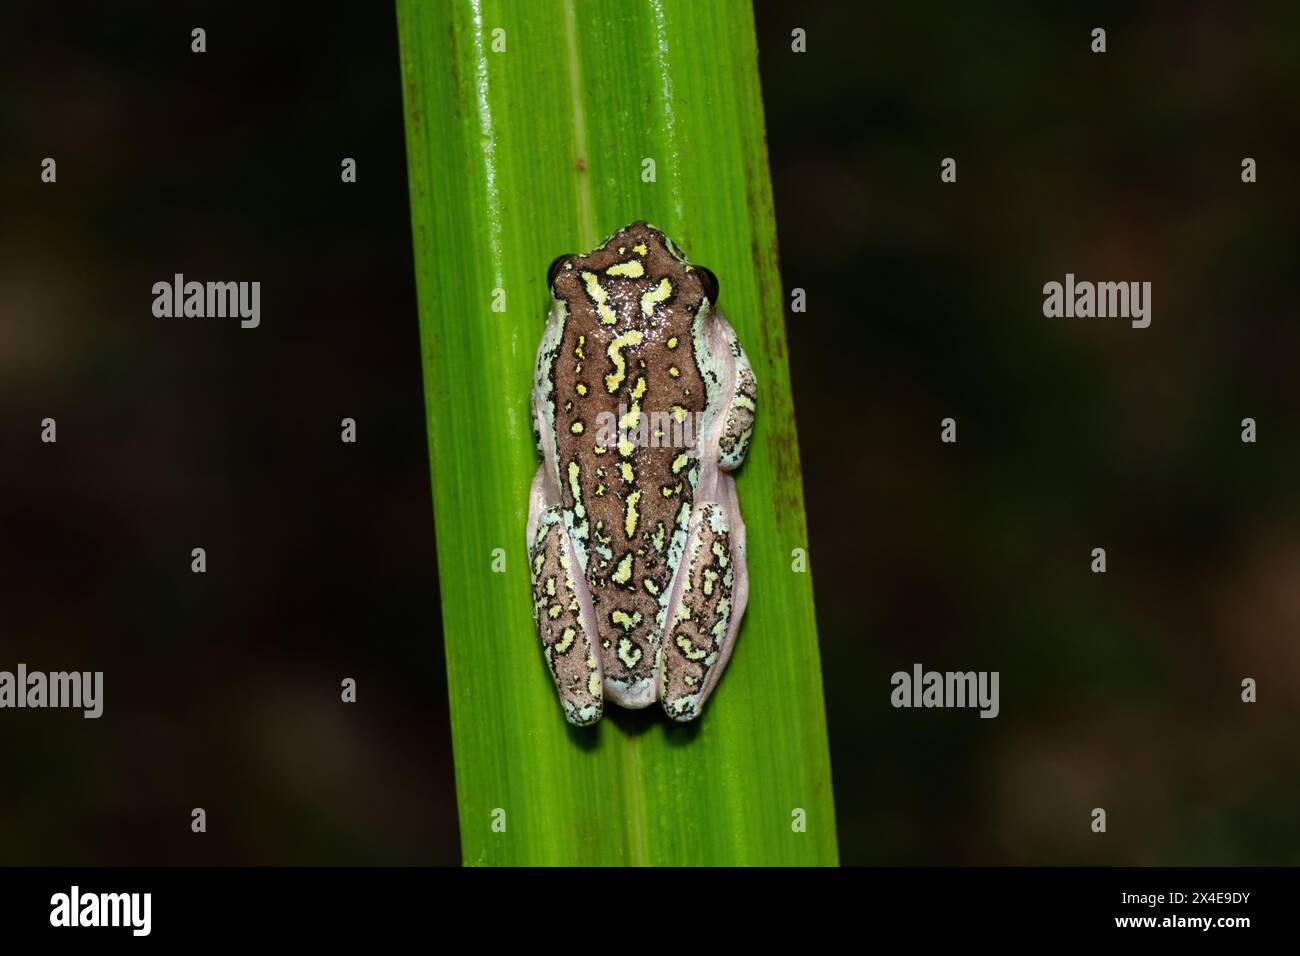 Beautiful painted reed frog, also known as a marbled reed frog (Hyperolius marmoratus) Stock Photo